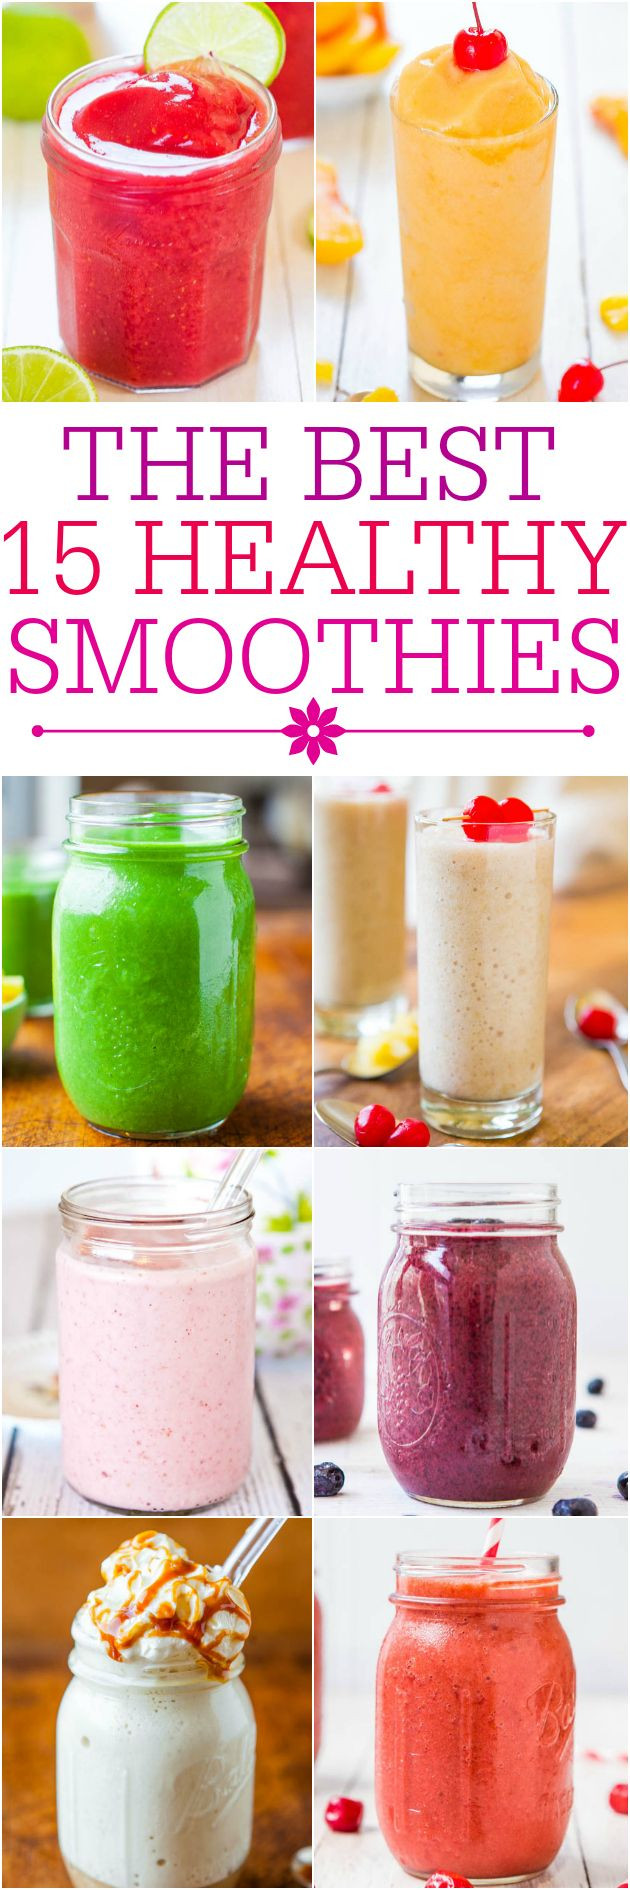 Fast Food Smoothies
 Recipe for smoothies ♥ Healthy smoothie drinks